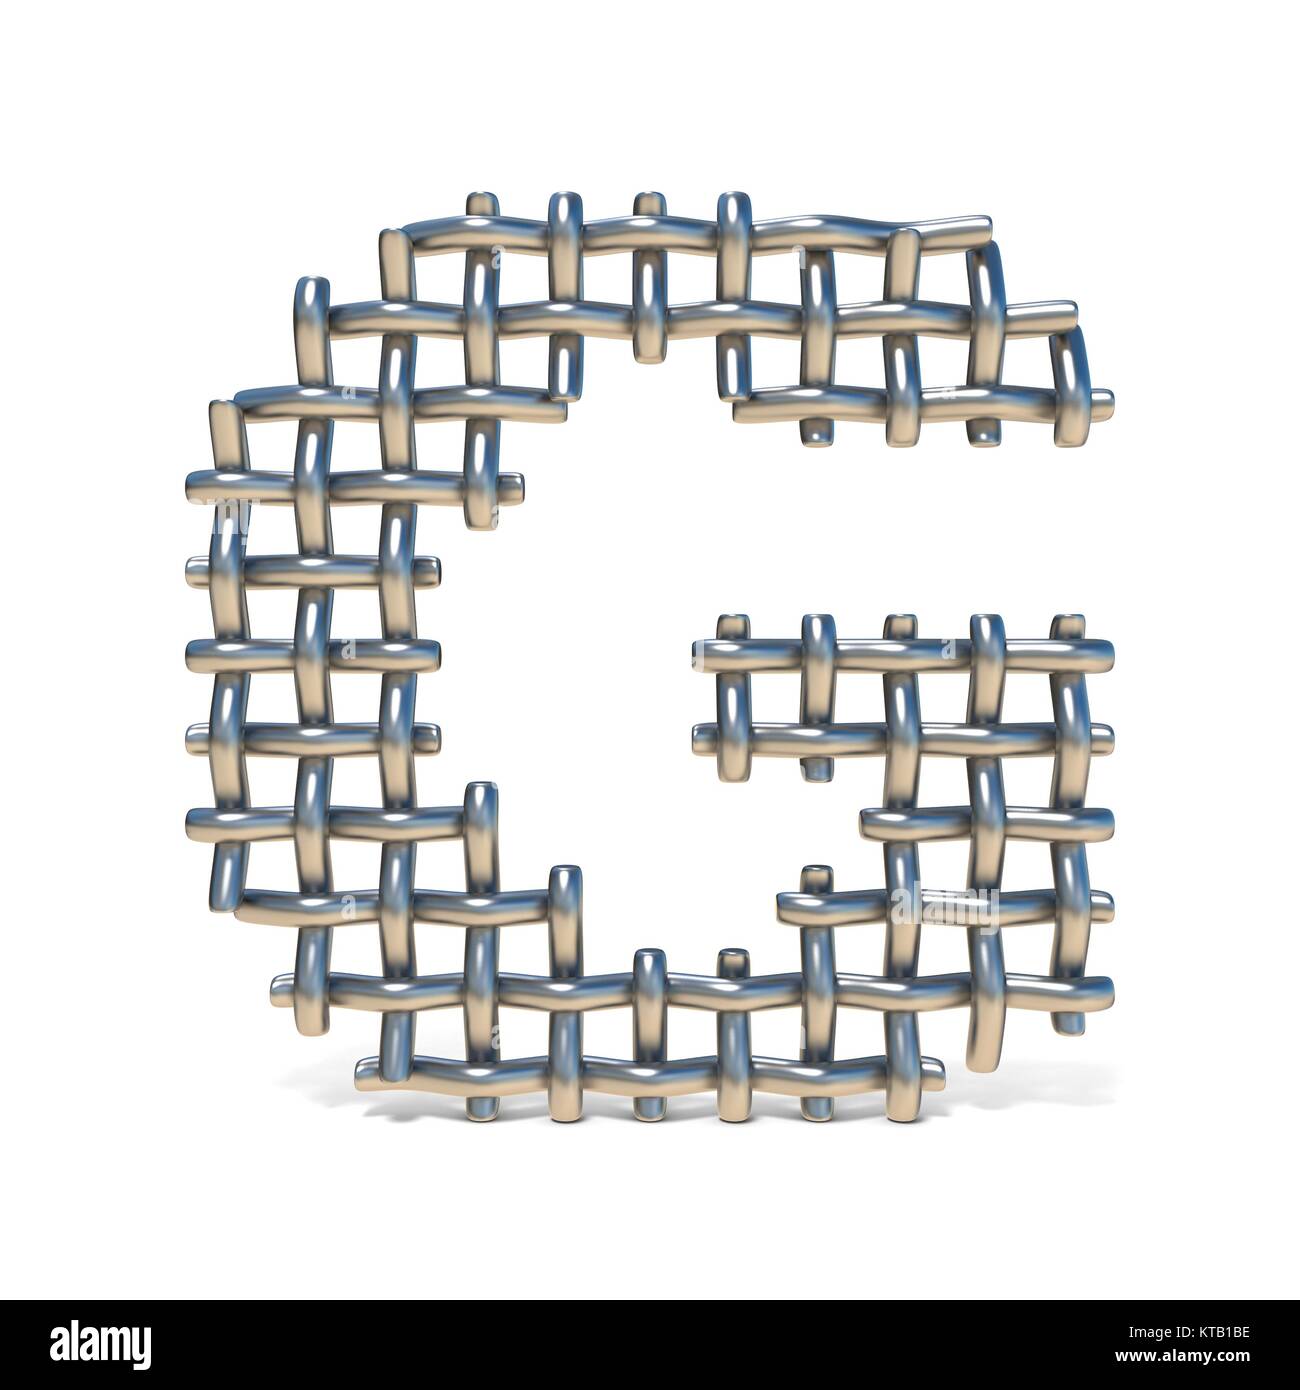 Metal wire mesh font LETTER G 3D Stock Photo - Alamy